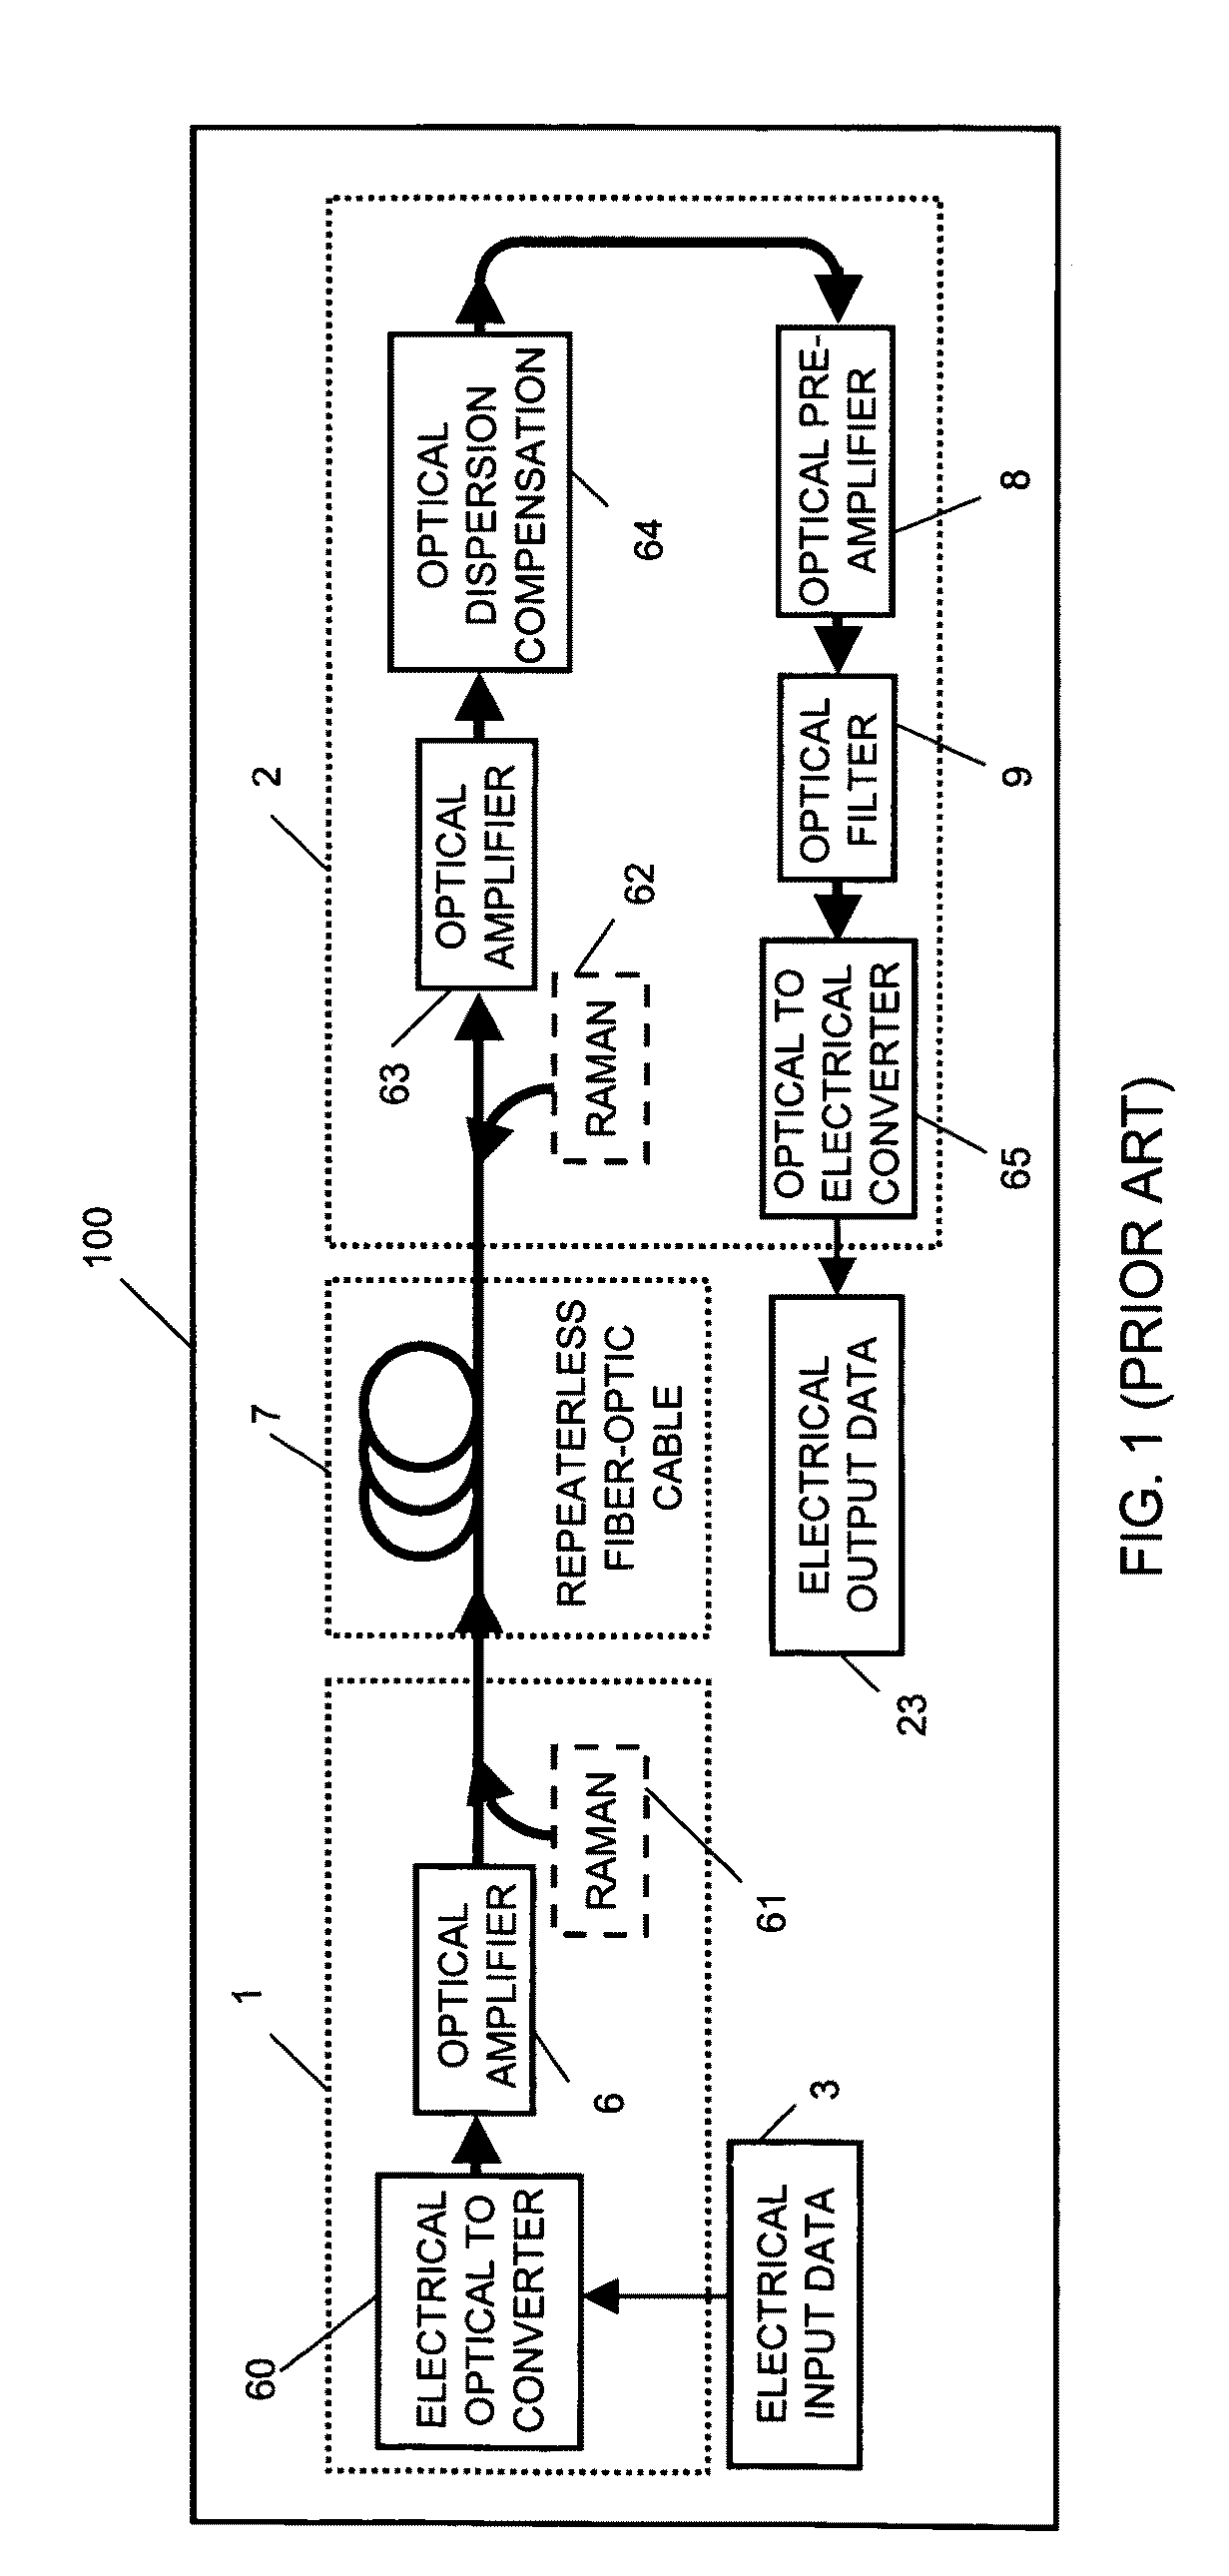 Method and apparatus for repeaterless high-speed optical transmission over single-mode fiber using coherent receiver and electronic dispersion compensation